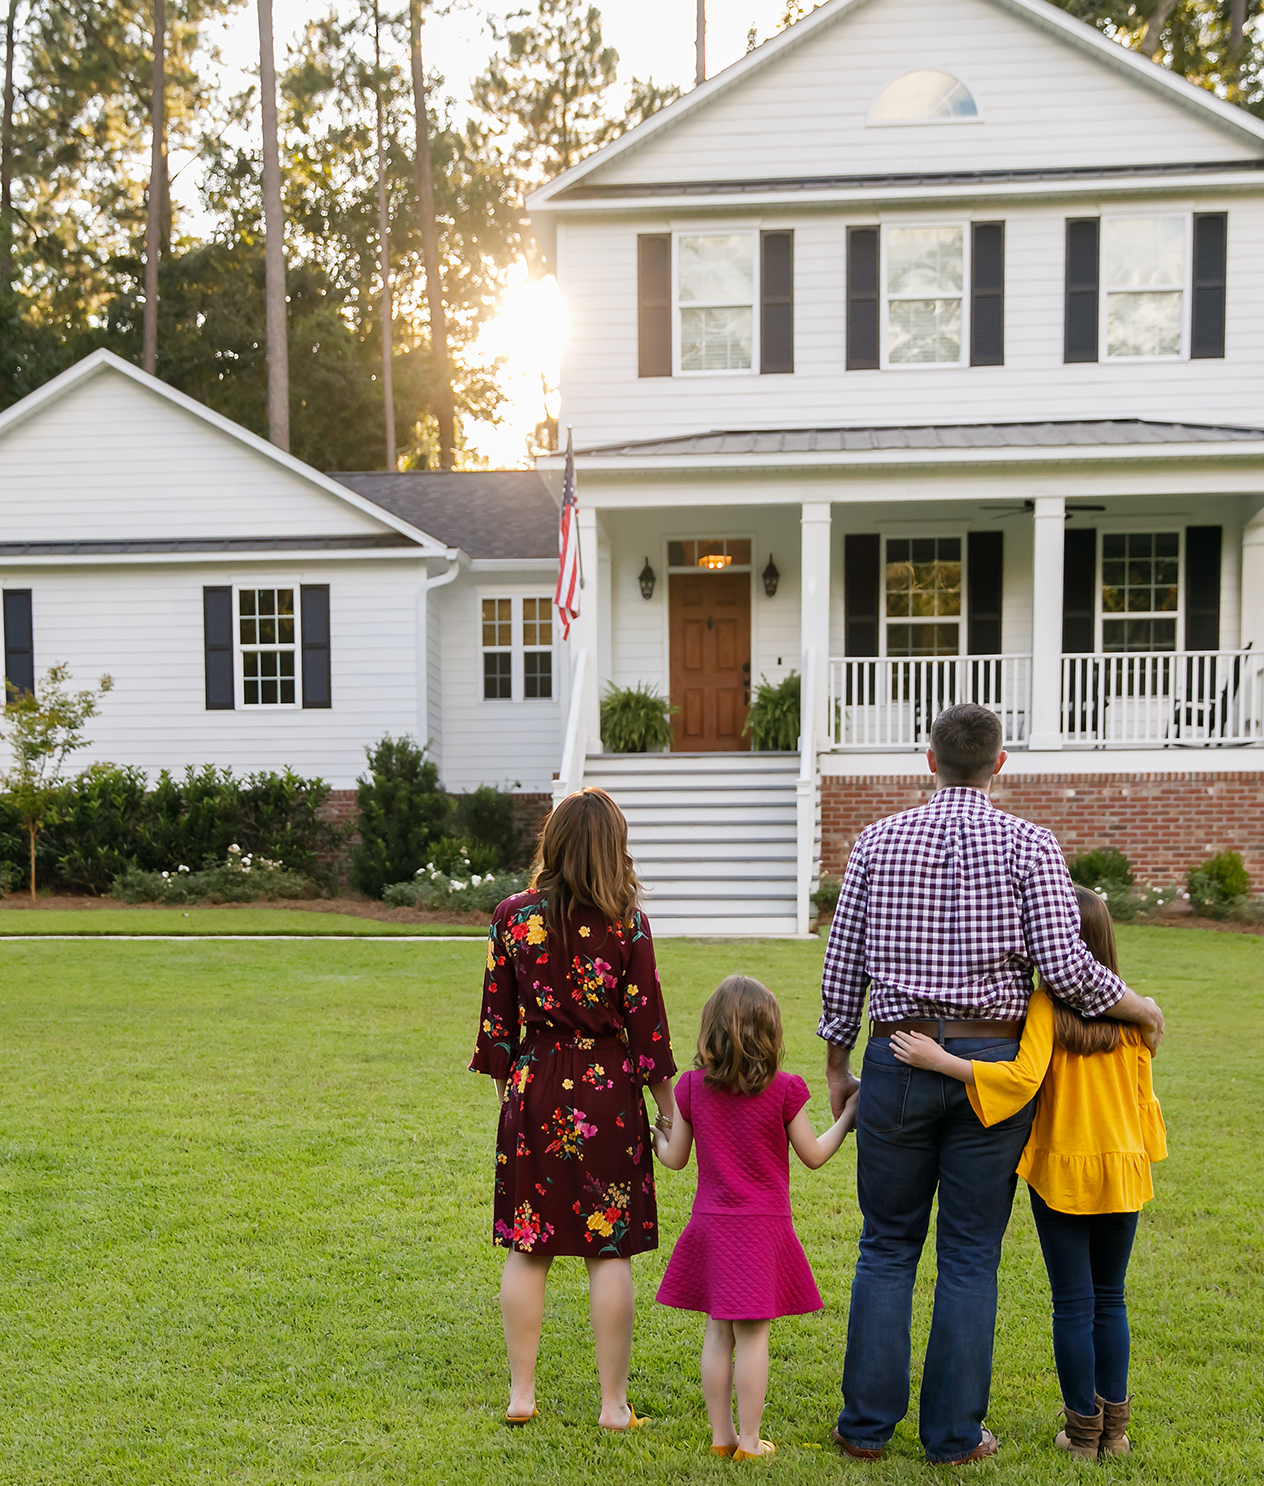 The Most Trusted Cartersville Home Warranty